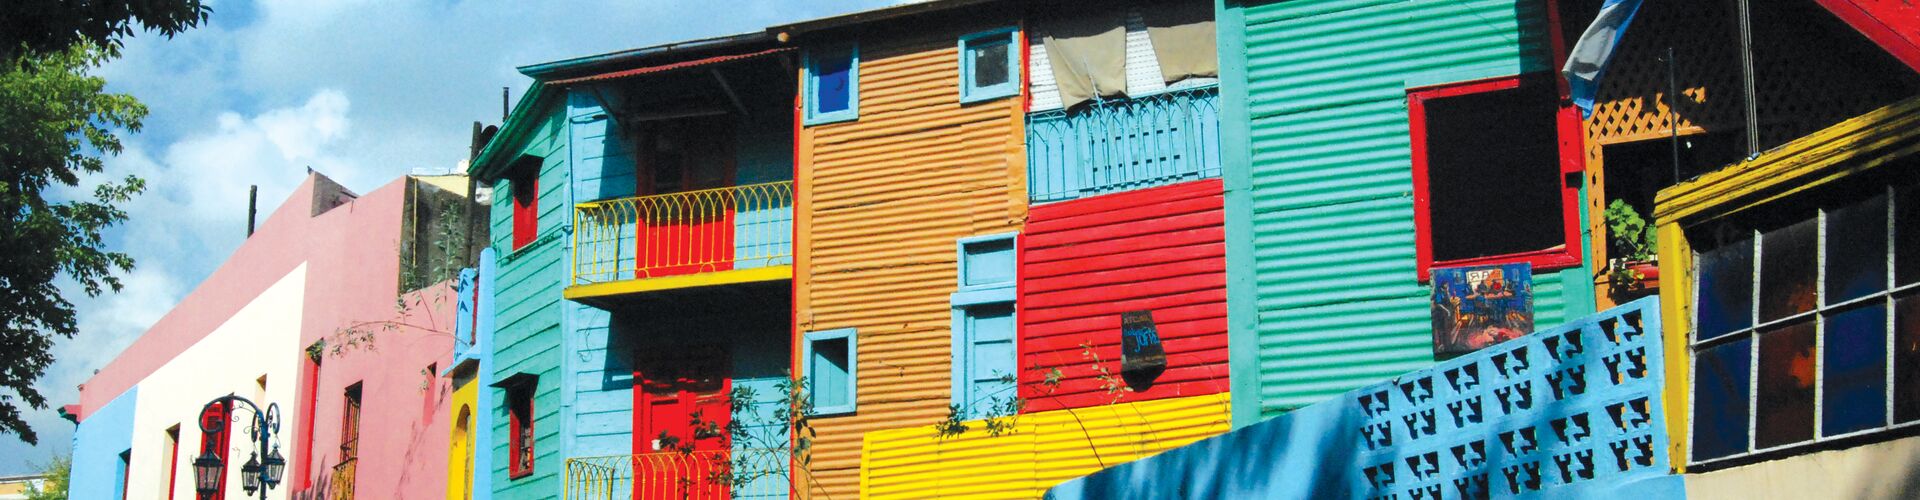 Colourful houses in Buenos Aires